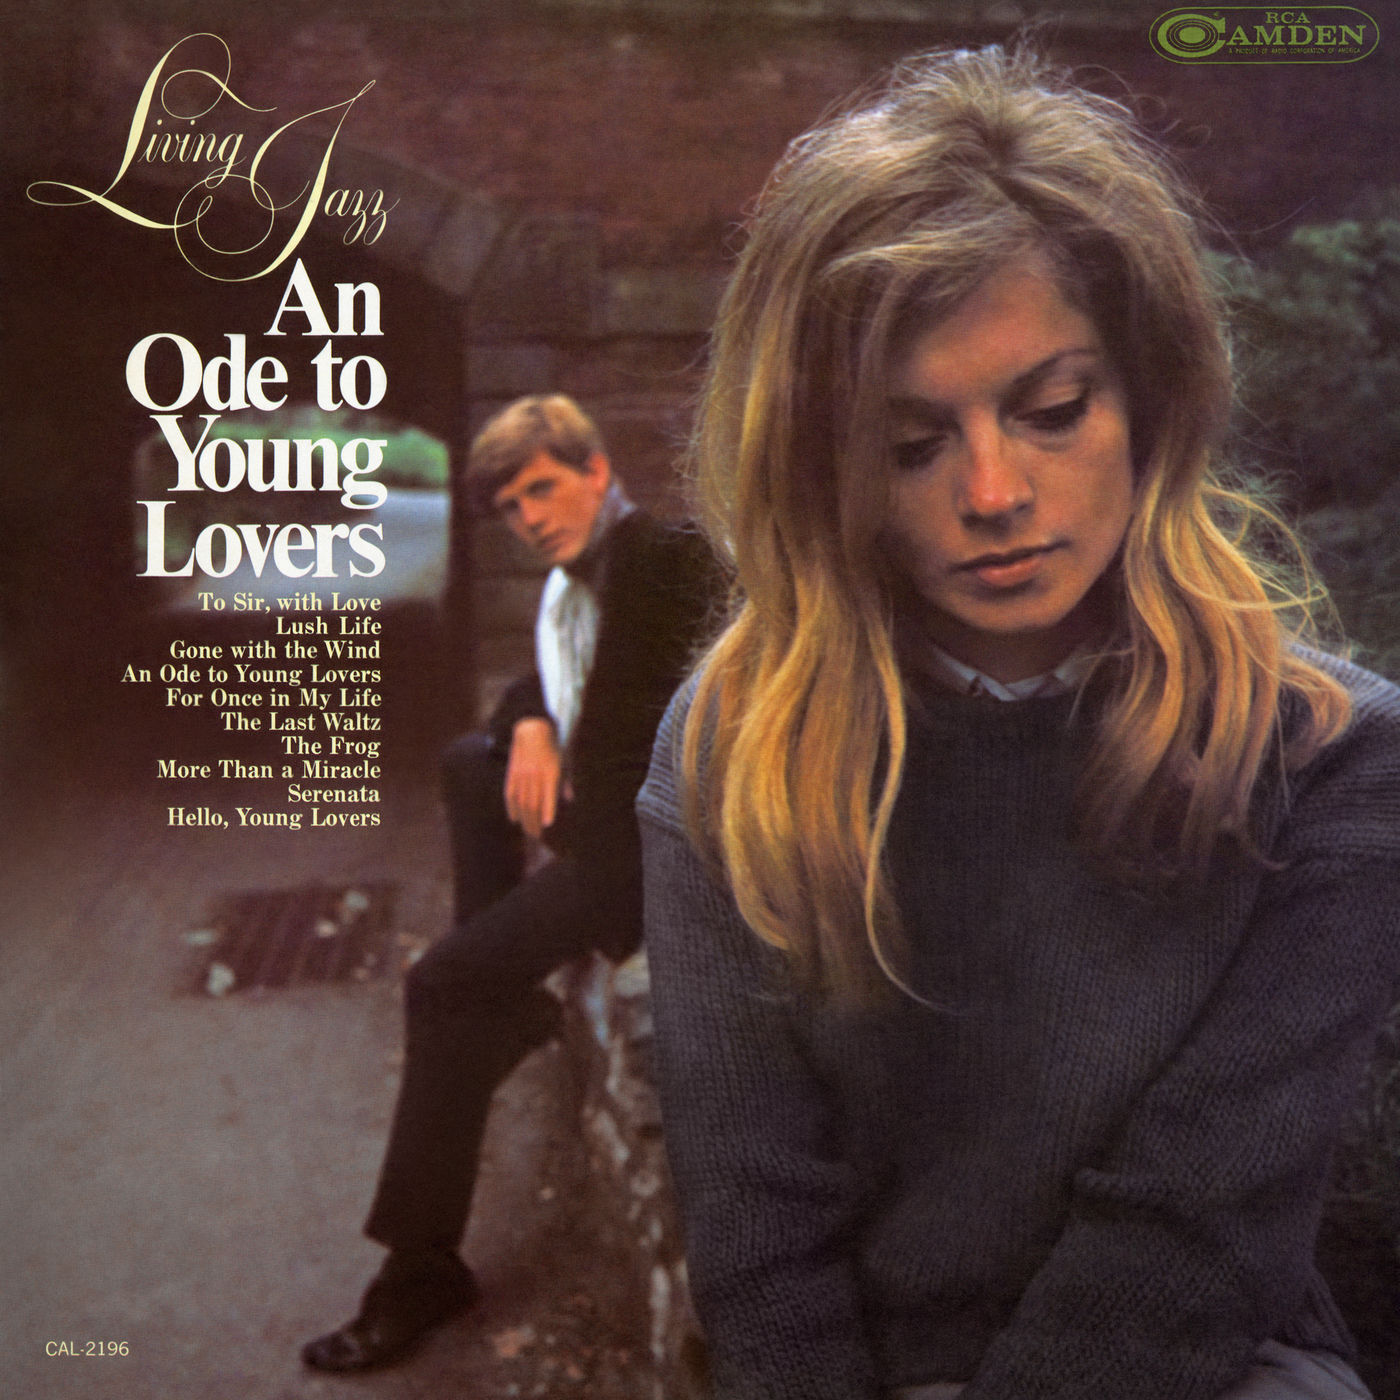 Living Jazz – An Ode to Young Lovers